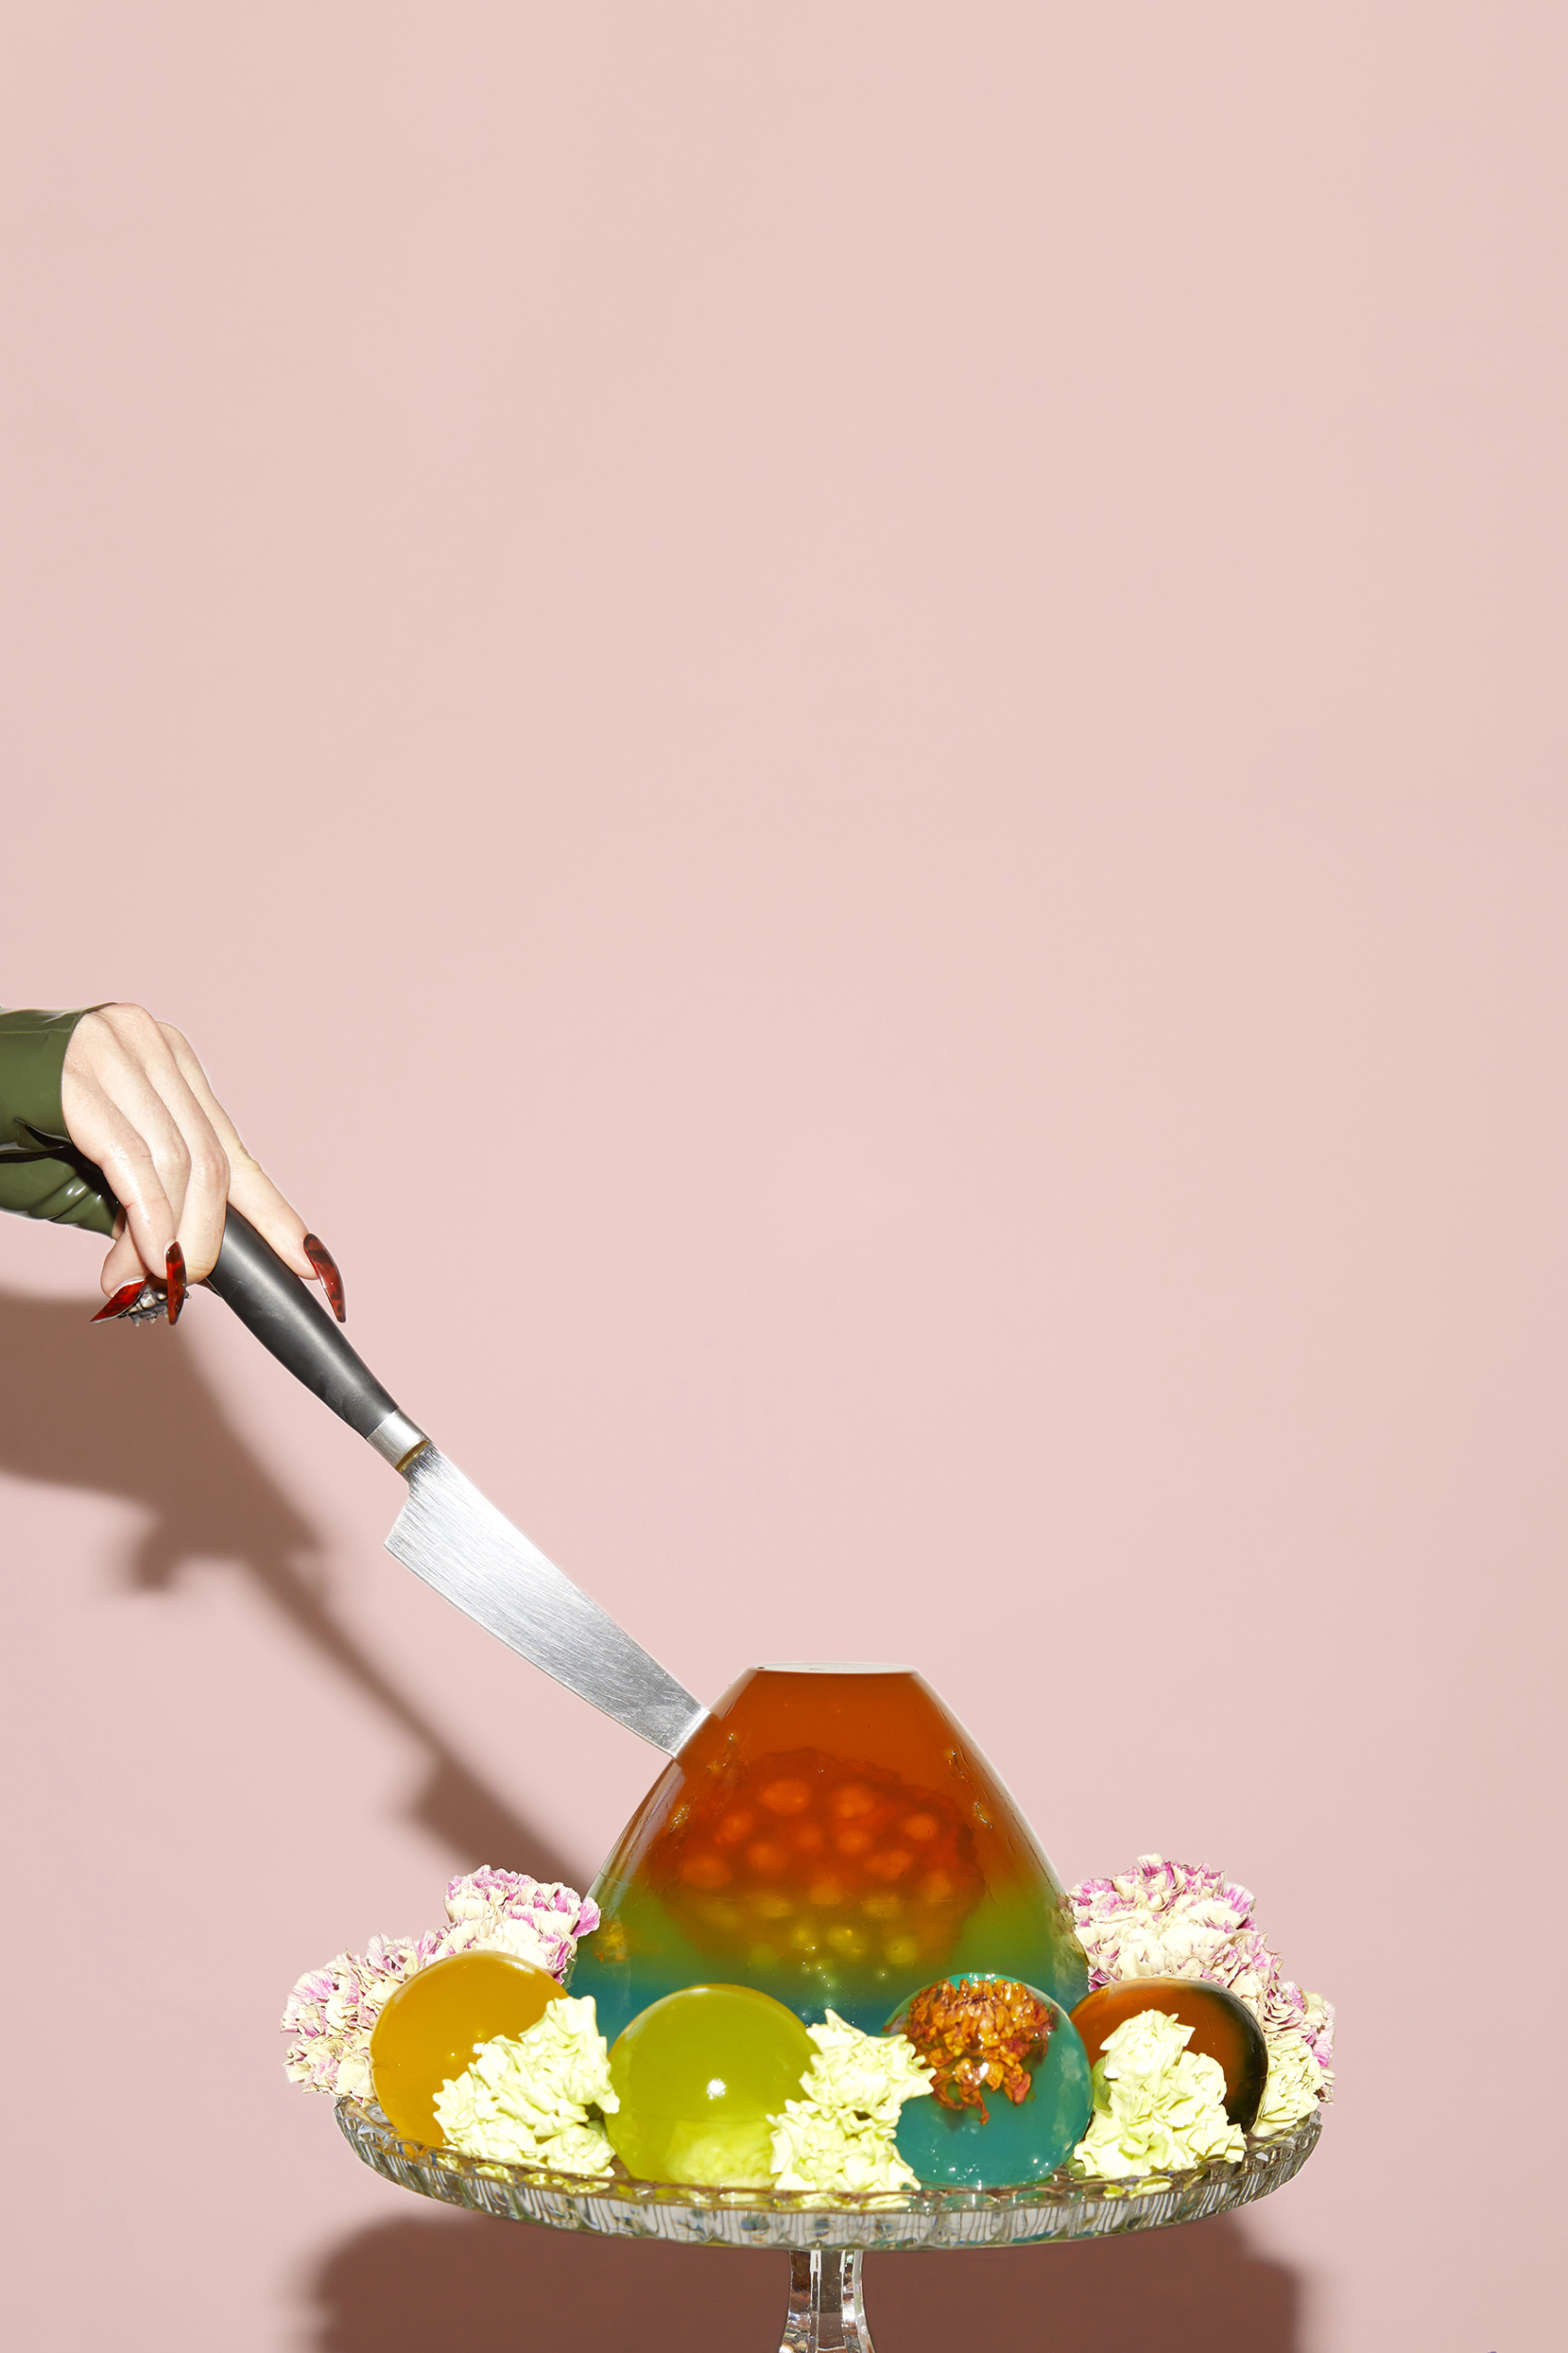 A rainbow jello cake on a pink background being cut with a knife